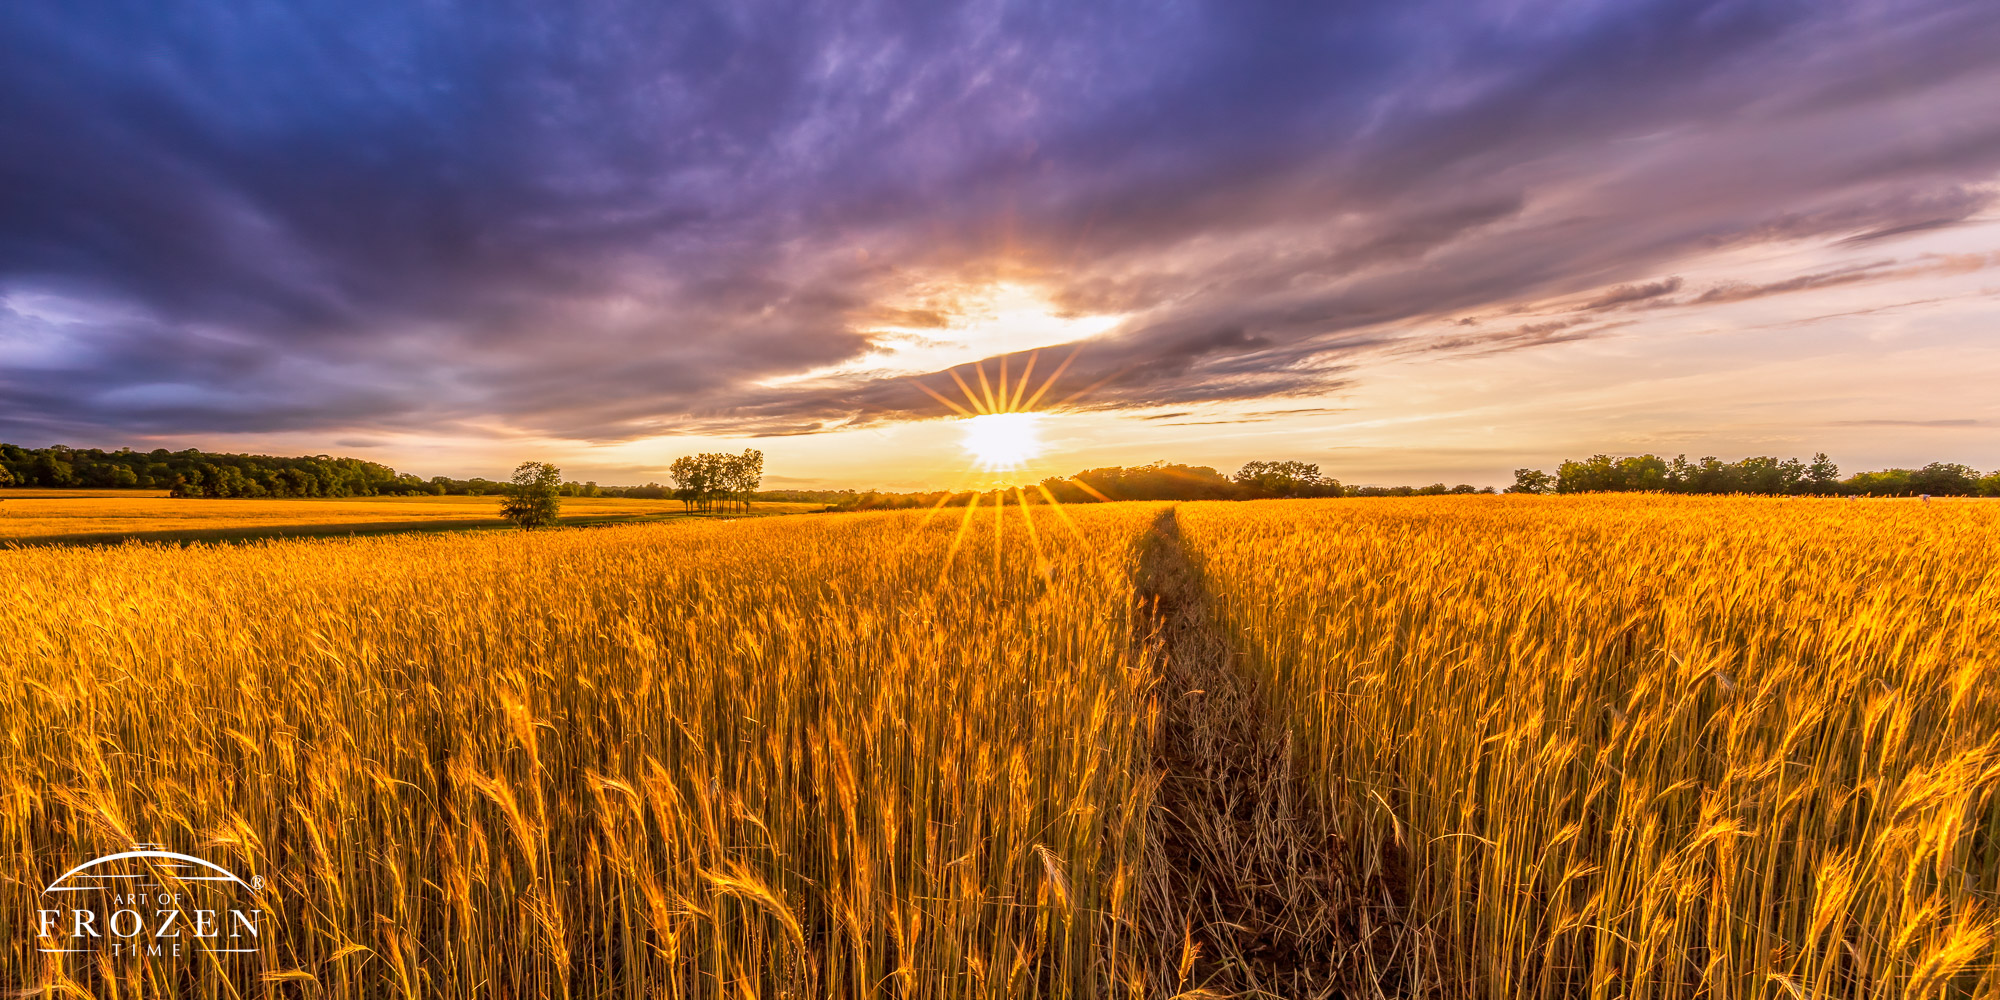 A panoramic scene of a wheat field at sunset where a path leads the eye twoards the horizon as the sun shines through a clearing of clouds creating a nostalgic scene